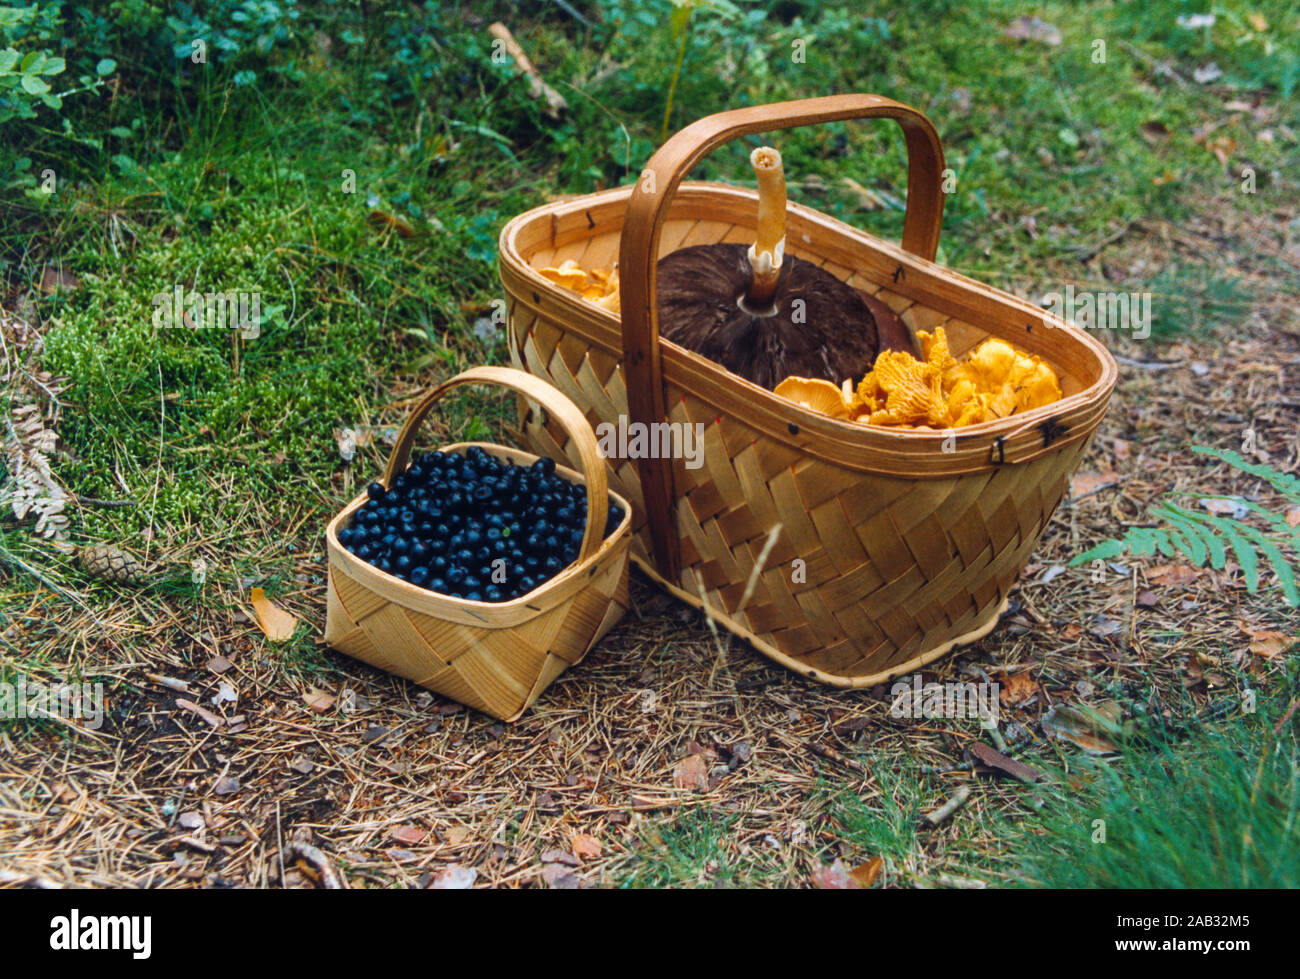 BASKETS with picked blueberries and mushrooms from a day in the forest Stock Photo